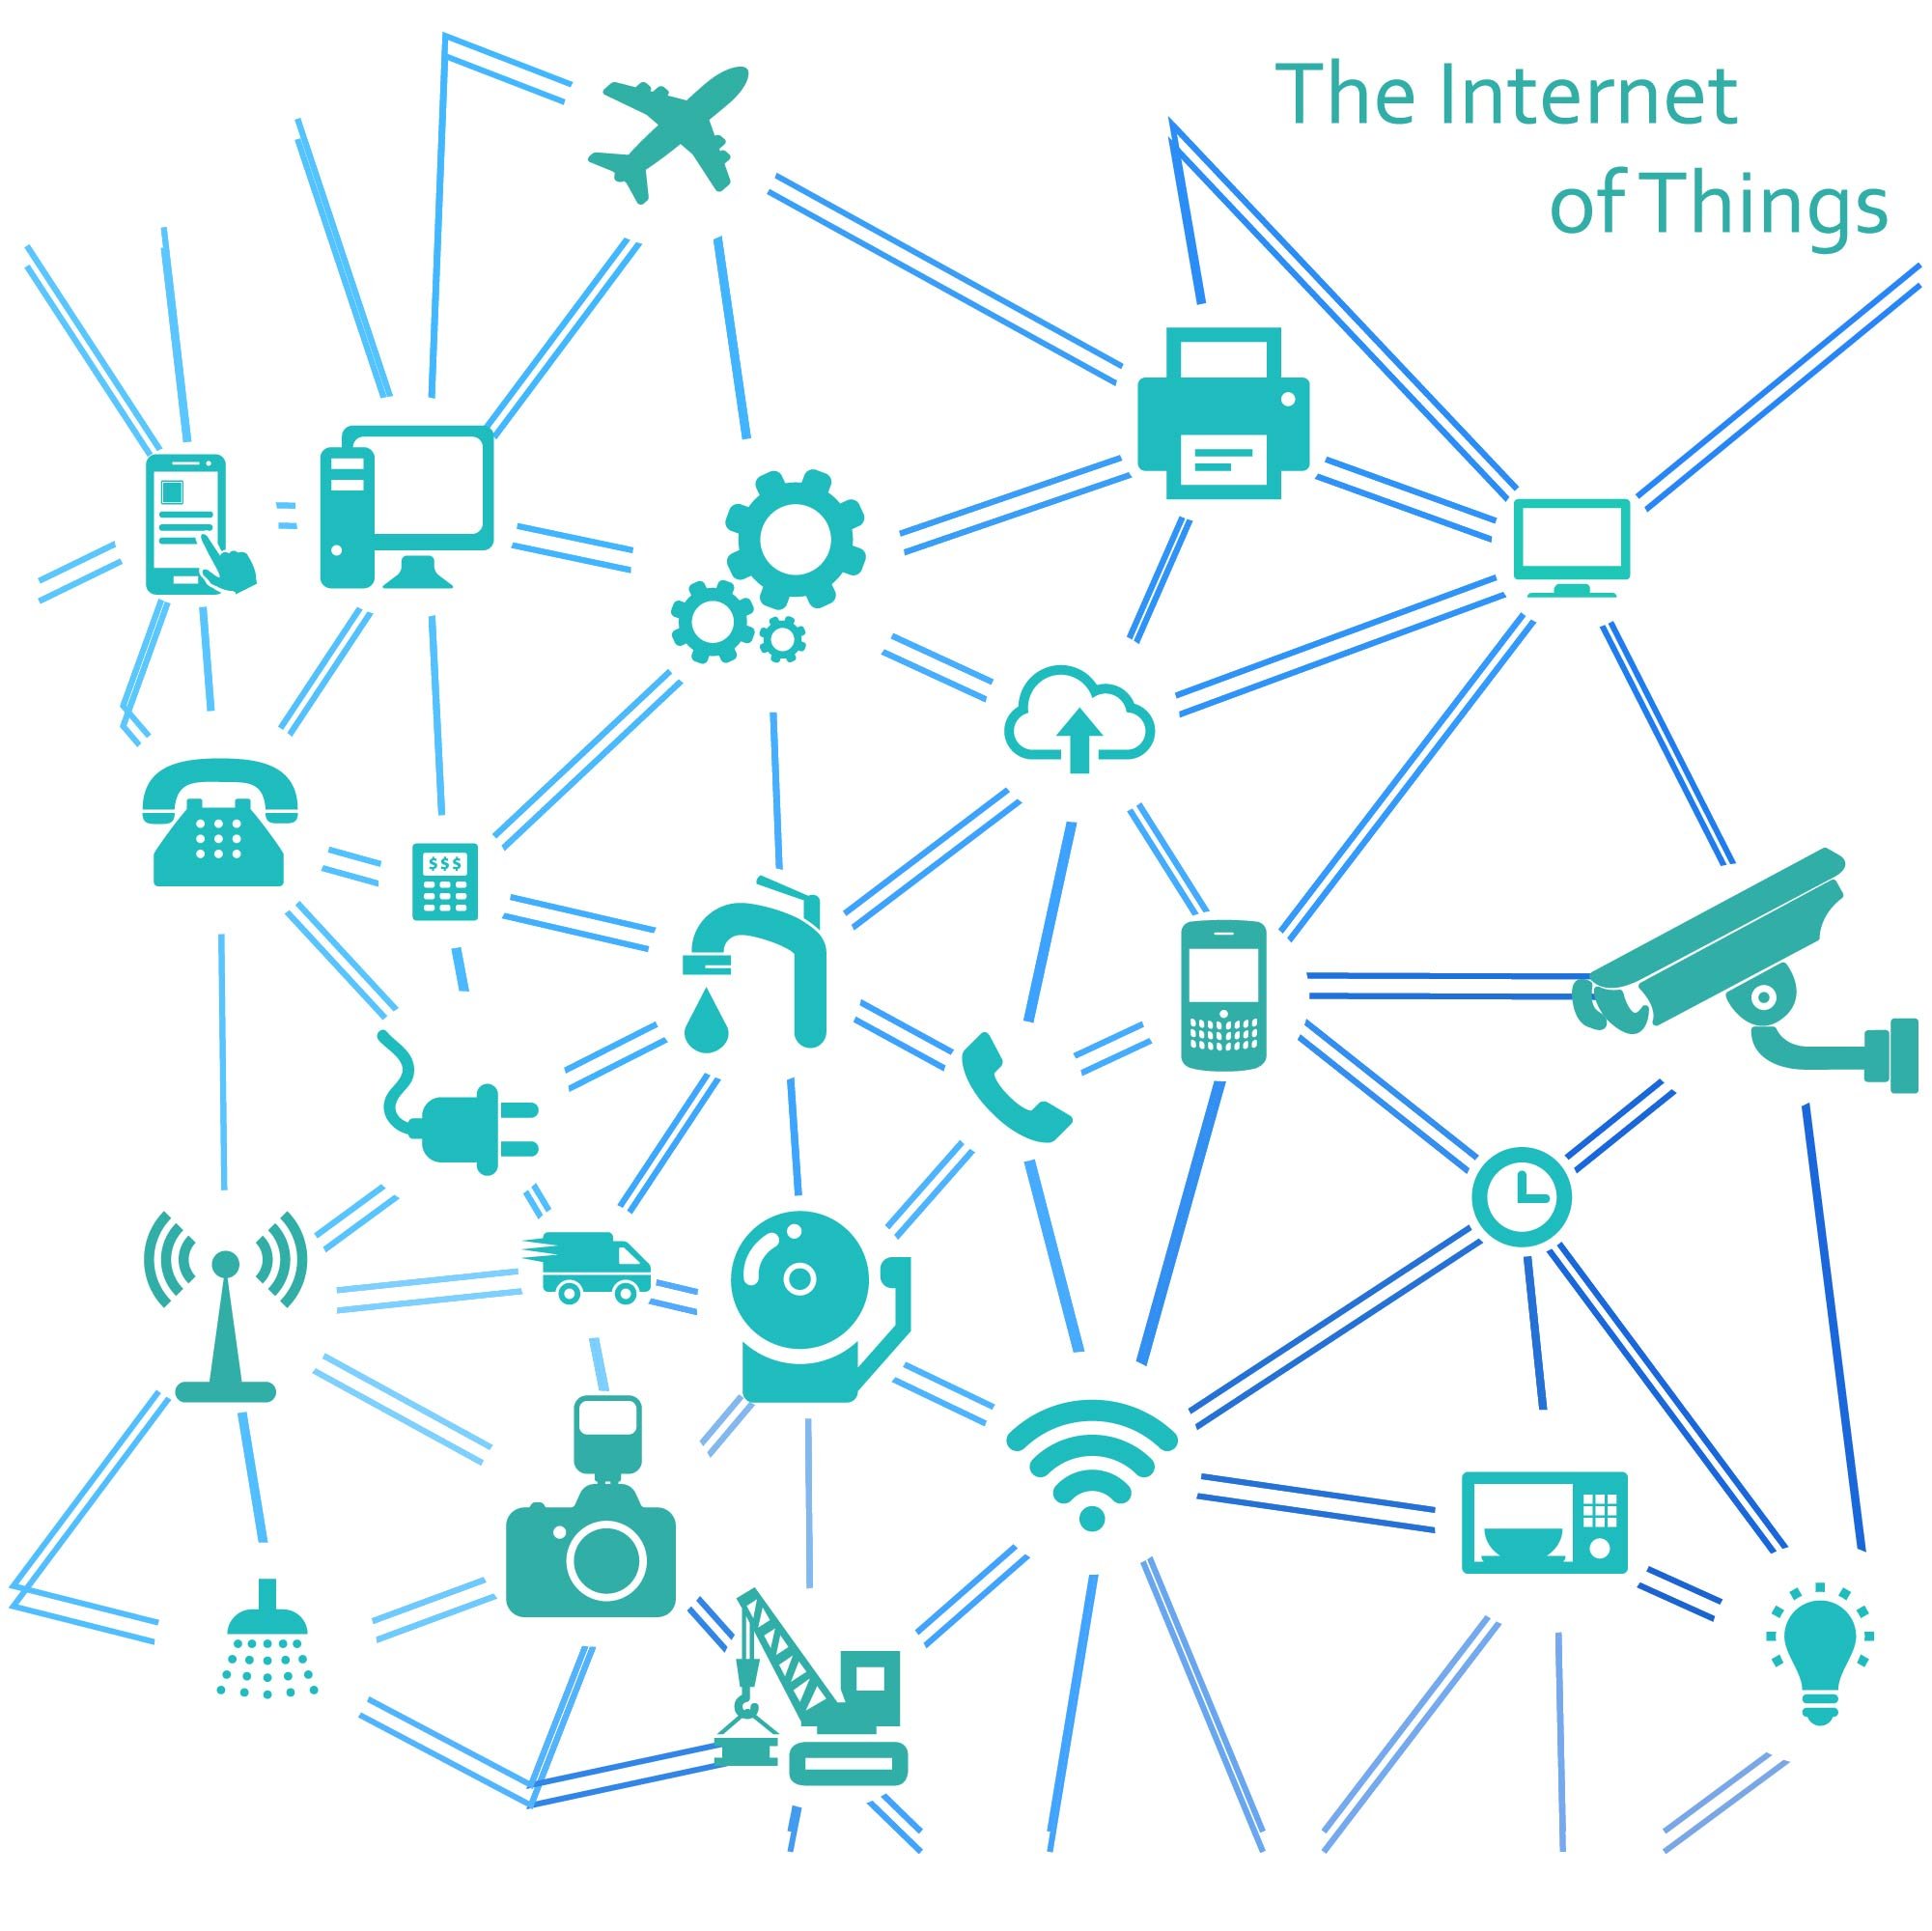 Image of the internet of things